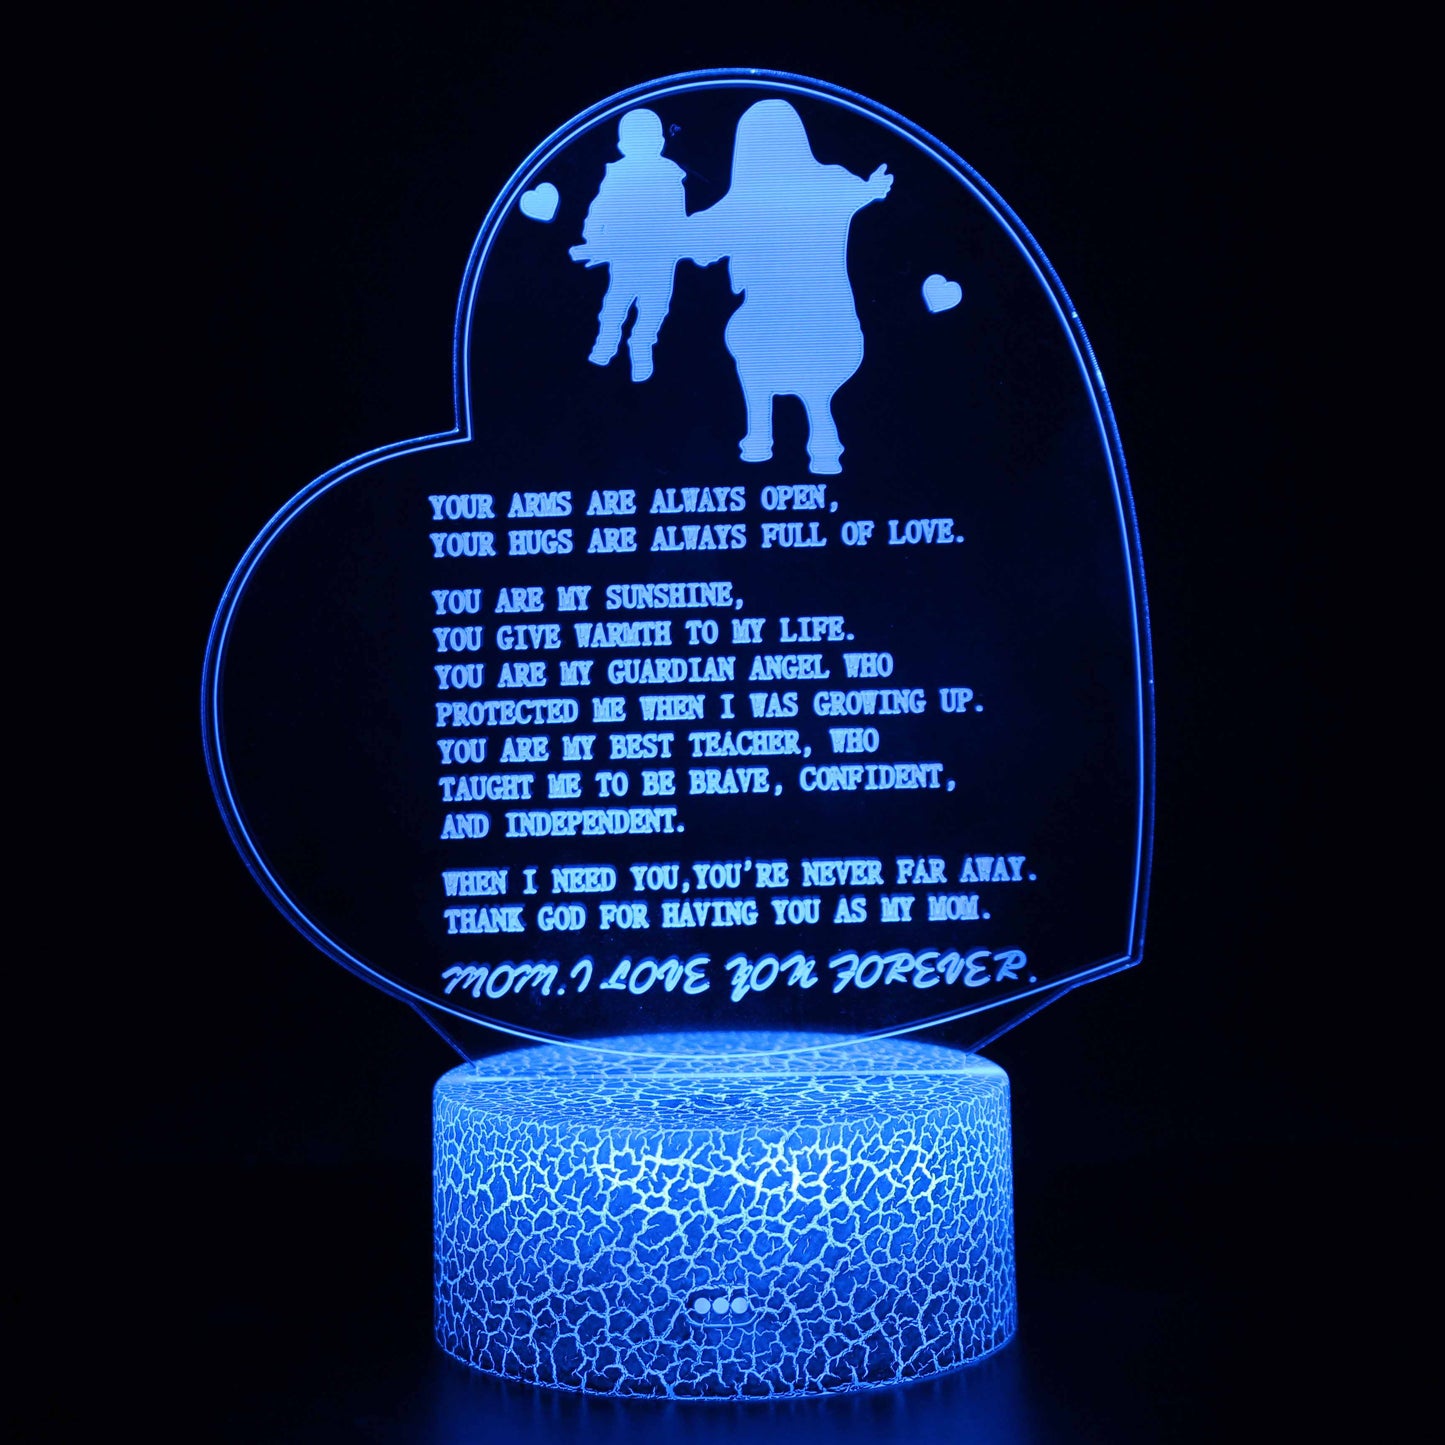 Mother's Day Mom I Love You Forever Quotes 3D Illusion Night Lamp